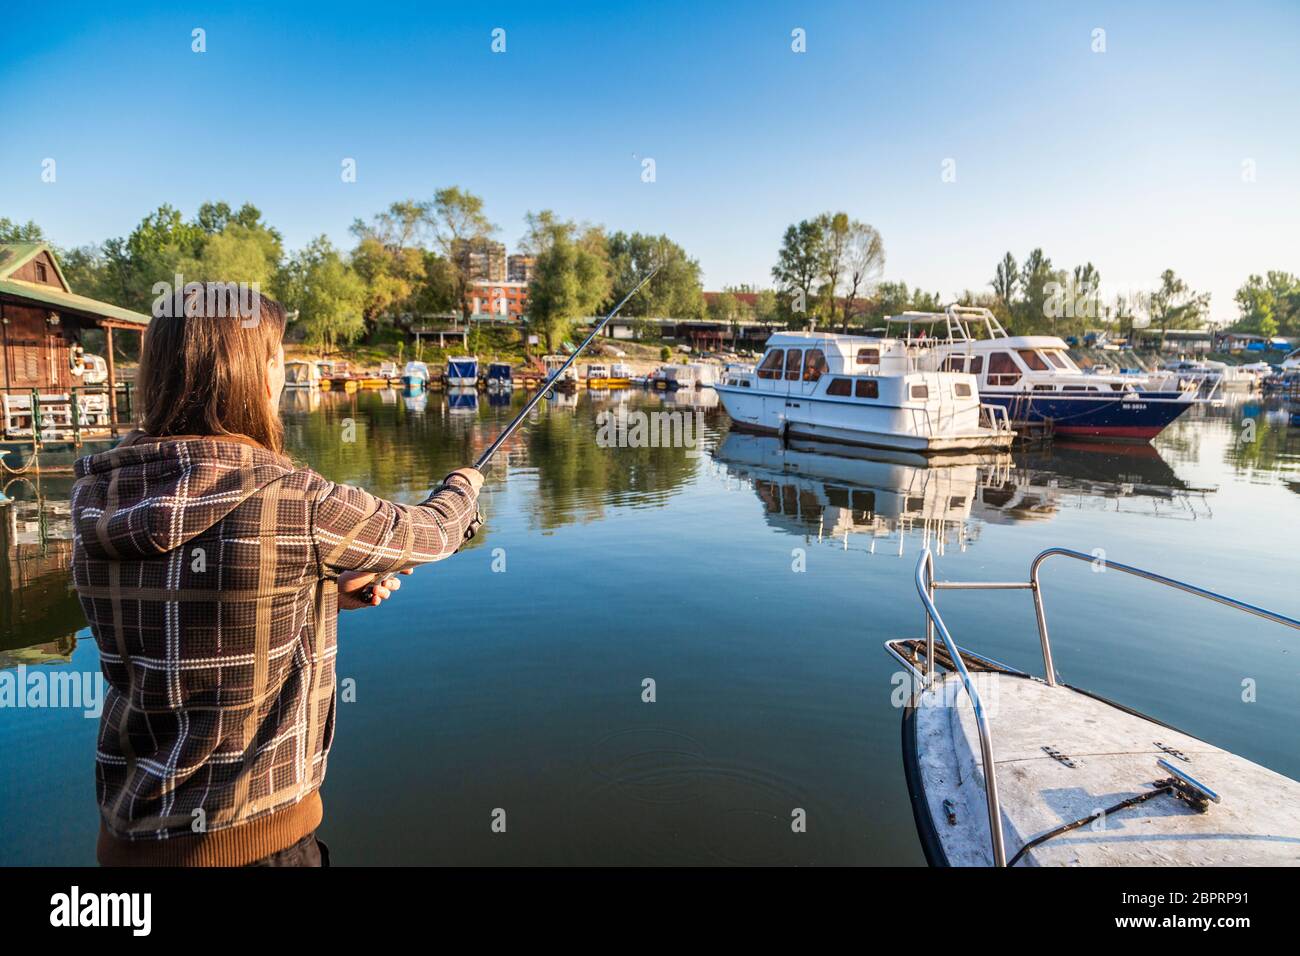 https://c8.alamy.com/comp/2BPRP91/man-with-long-hair-is-fishing-at-river-corner-from-raft-boats-and-floating-houses-are-around-him-with-trees-in-background-he-is-using-fishing-rod-wi-2BPRP91.jpg